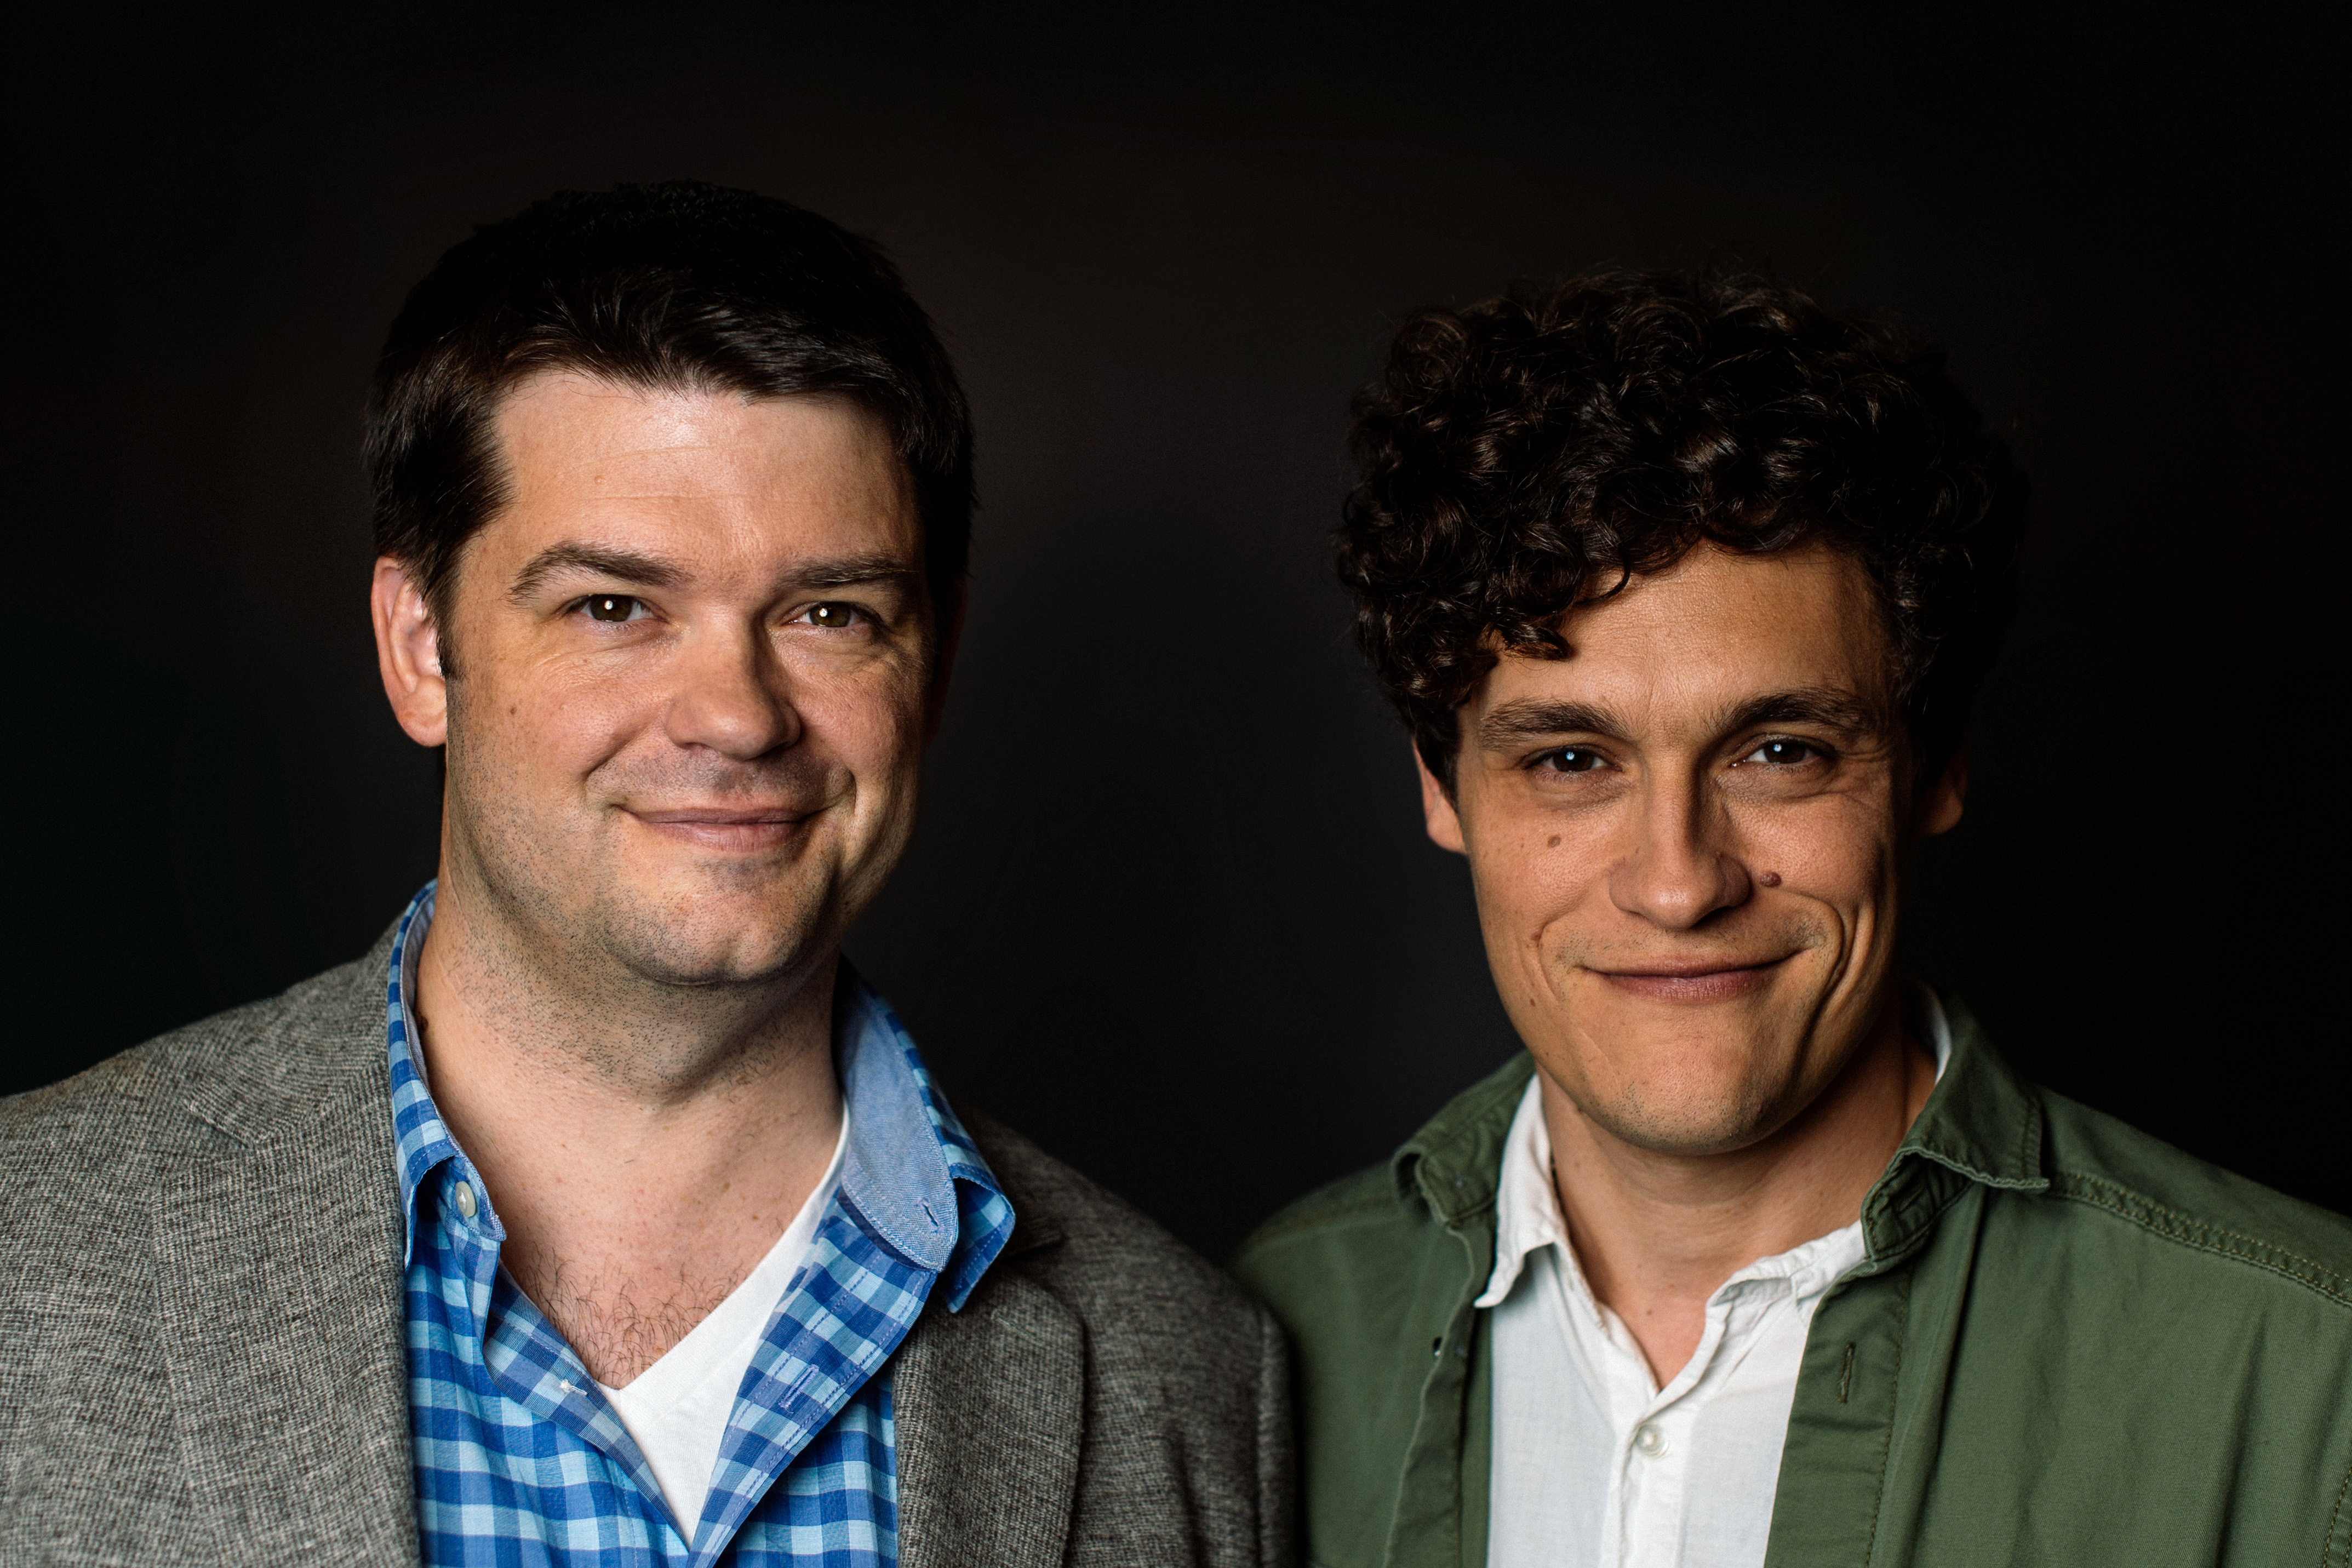 Chris Miller and Phil Lord pose for a portrait during the Star Wars Convention 2016 on July 15, 2016 in London, England. (Ben Pruchnie&mdash;Getty Images)